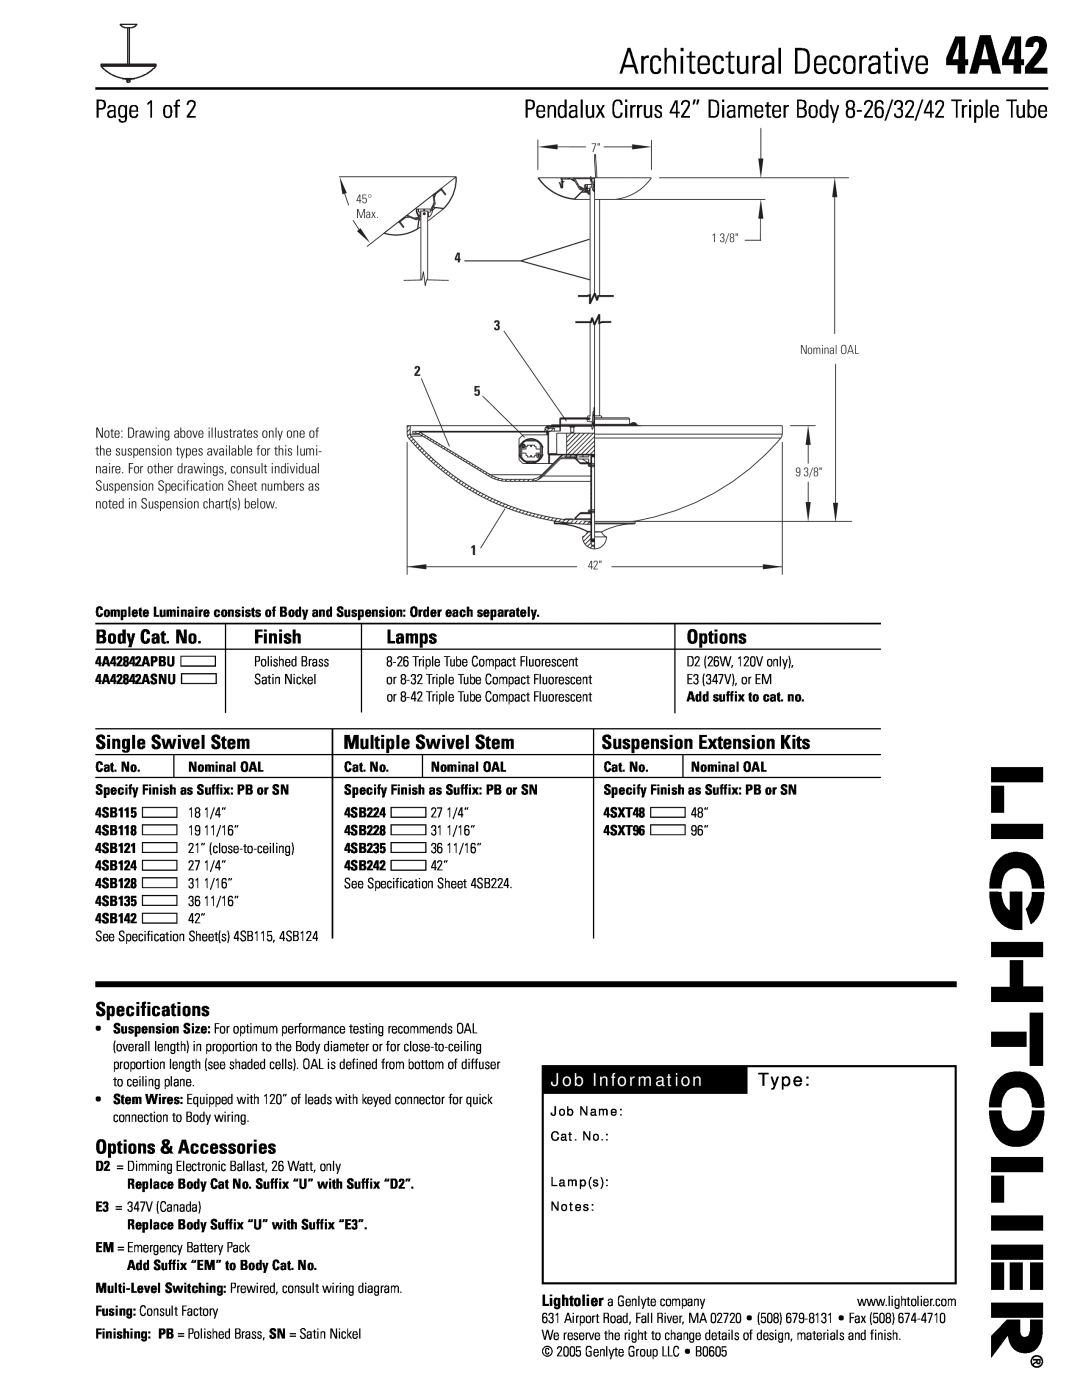 Lightolier specifications Architectural Decorative 4A42, Page 1 of, Finish, Lamps, Options, Single Swivel Stem, Type 